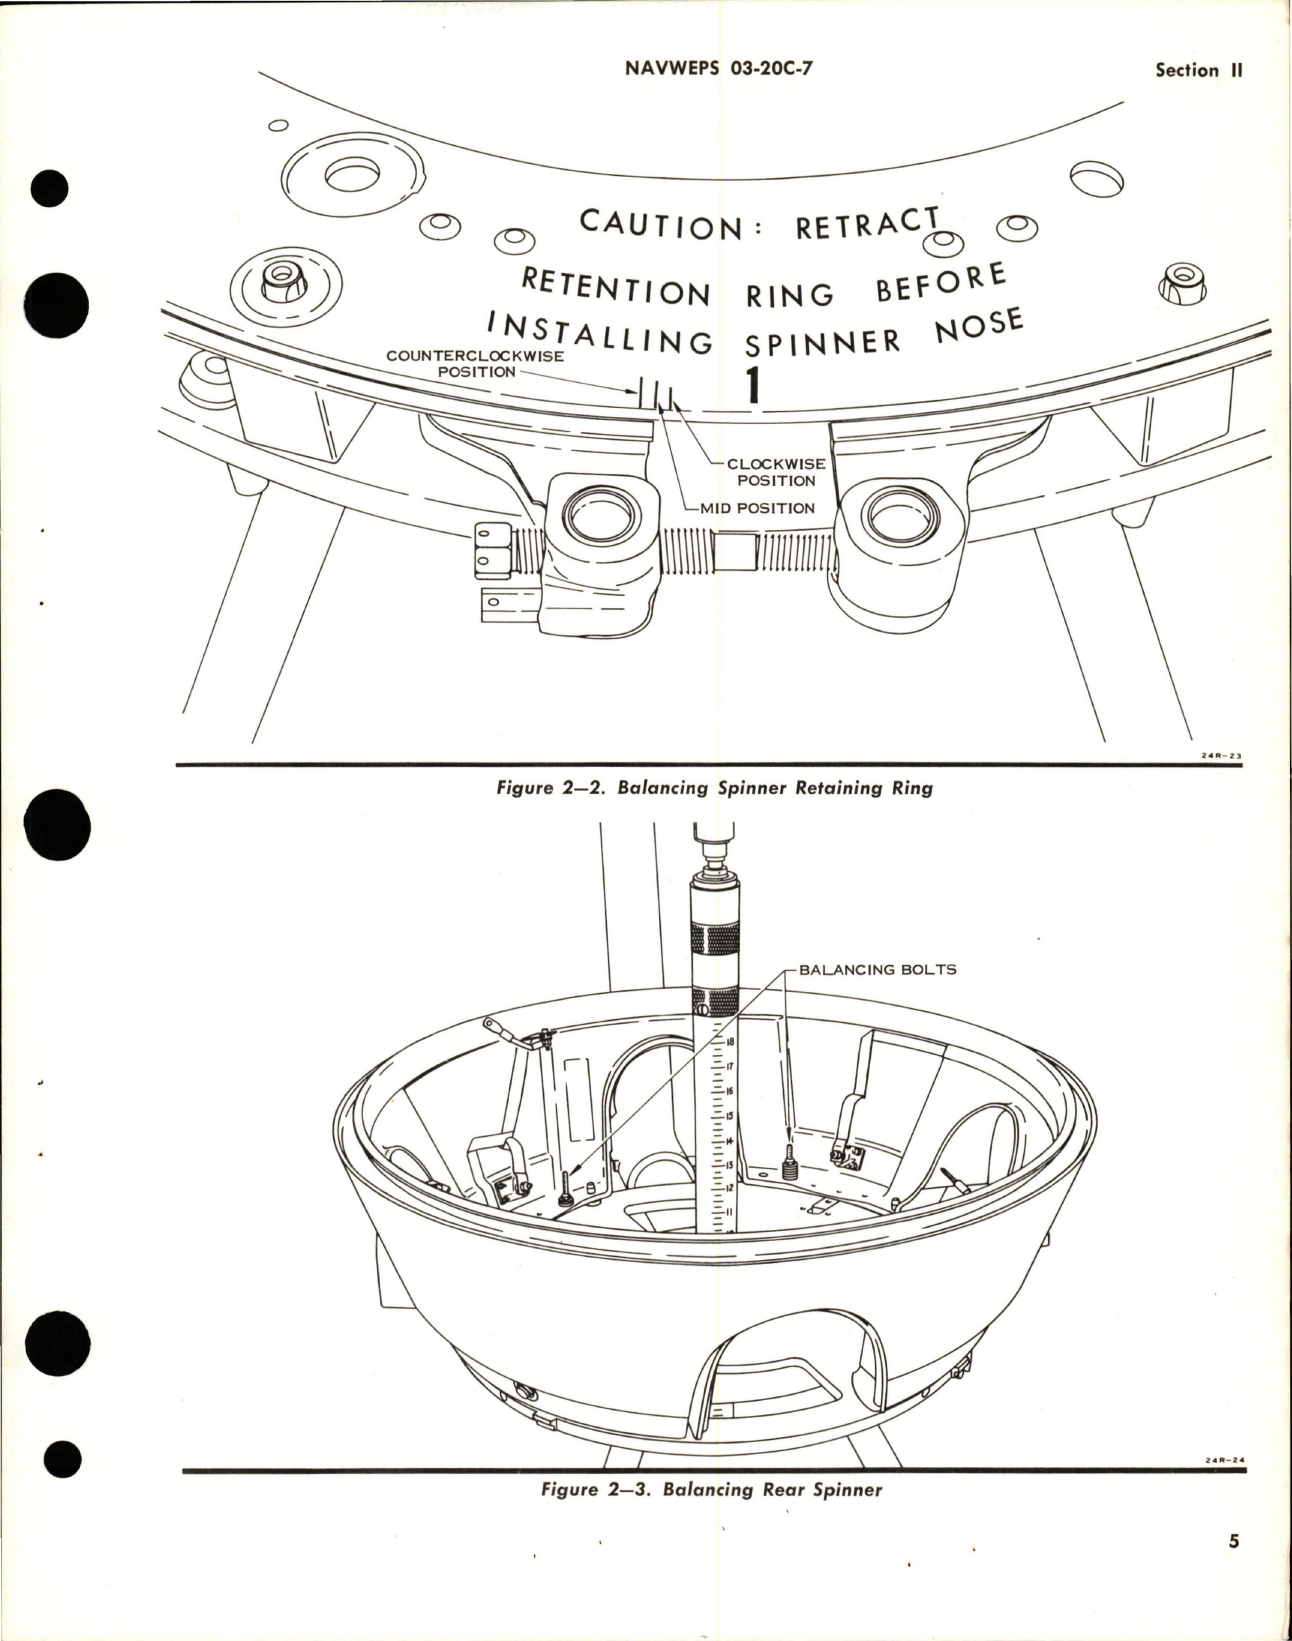 Sample page 9 from AirCorps Library document: Overhaul Instructions for Aircraft Propeller Spinner and Anti-Icing - Spinner Assembly 549427 -  Afterbody Assembly 557635